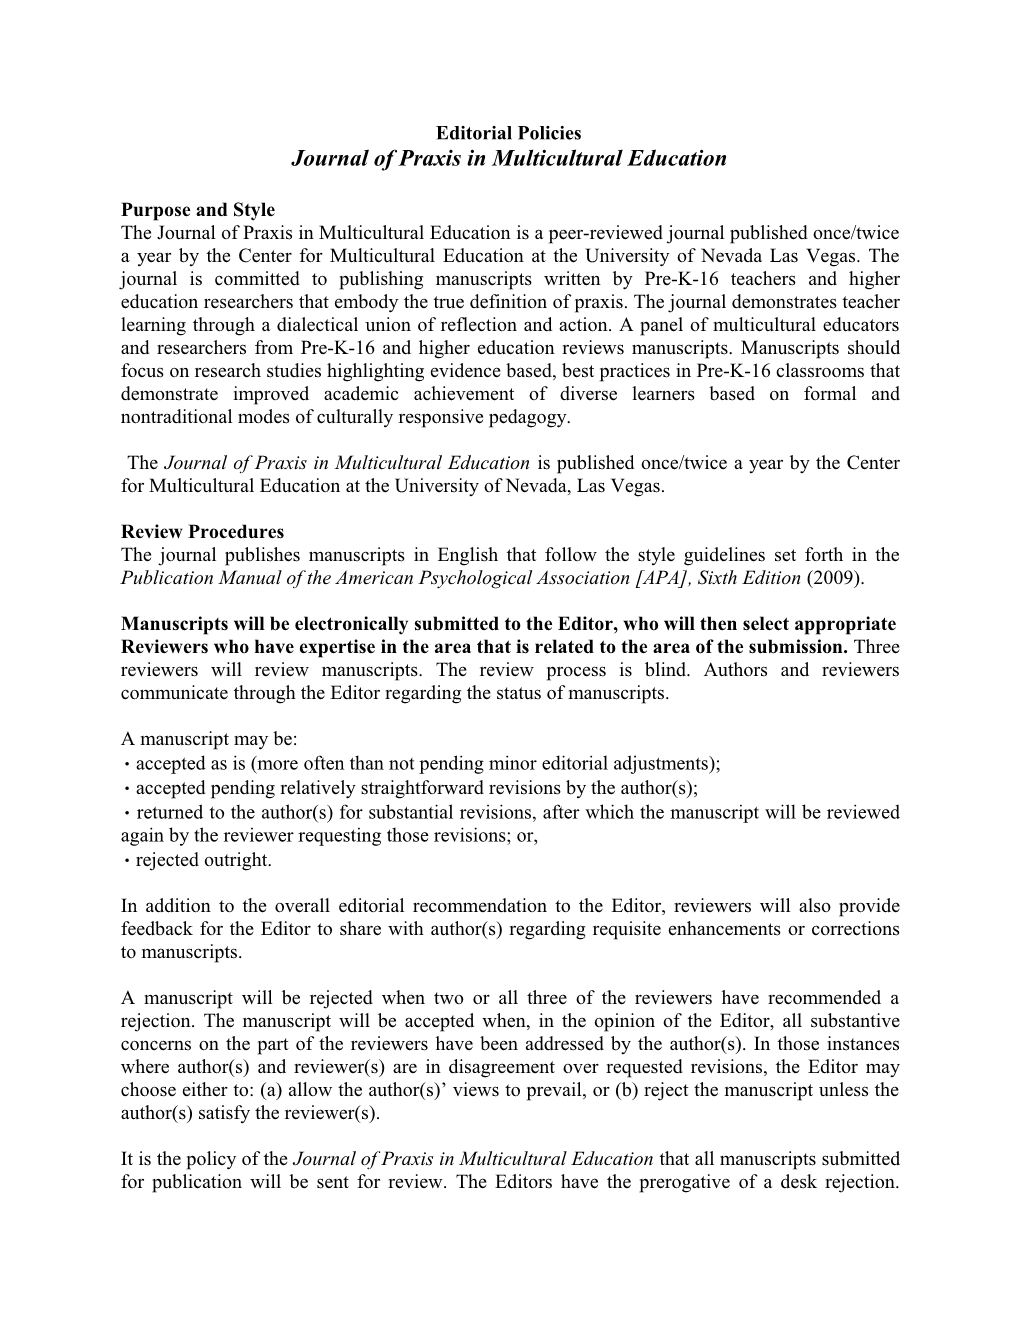 Journal of Praxis in Multicultural Education